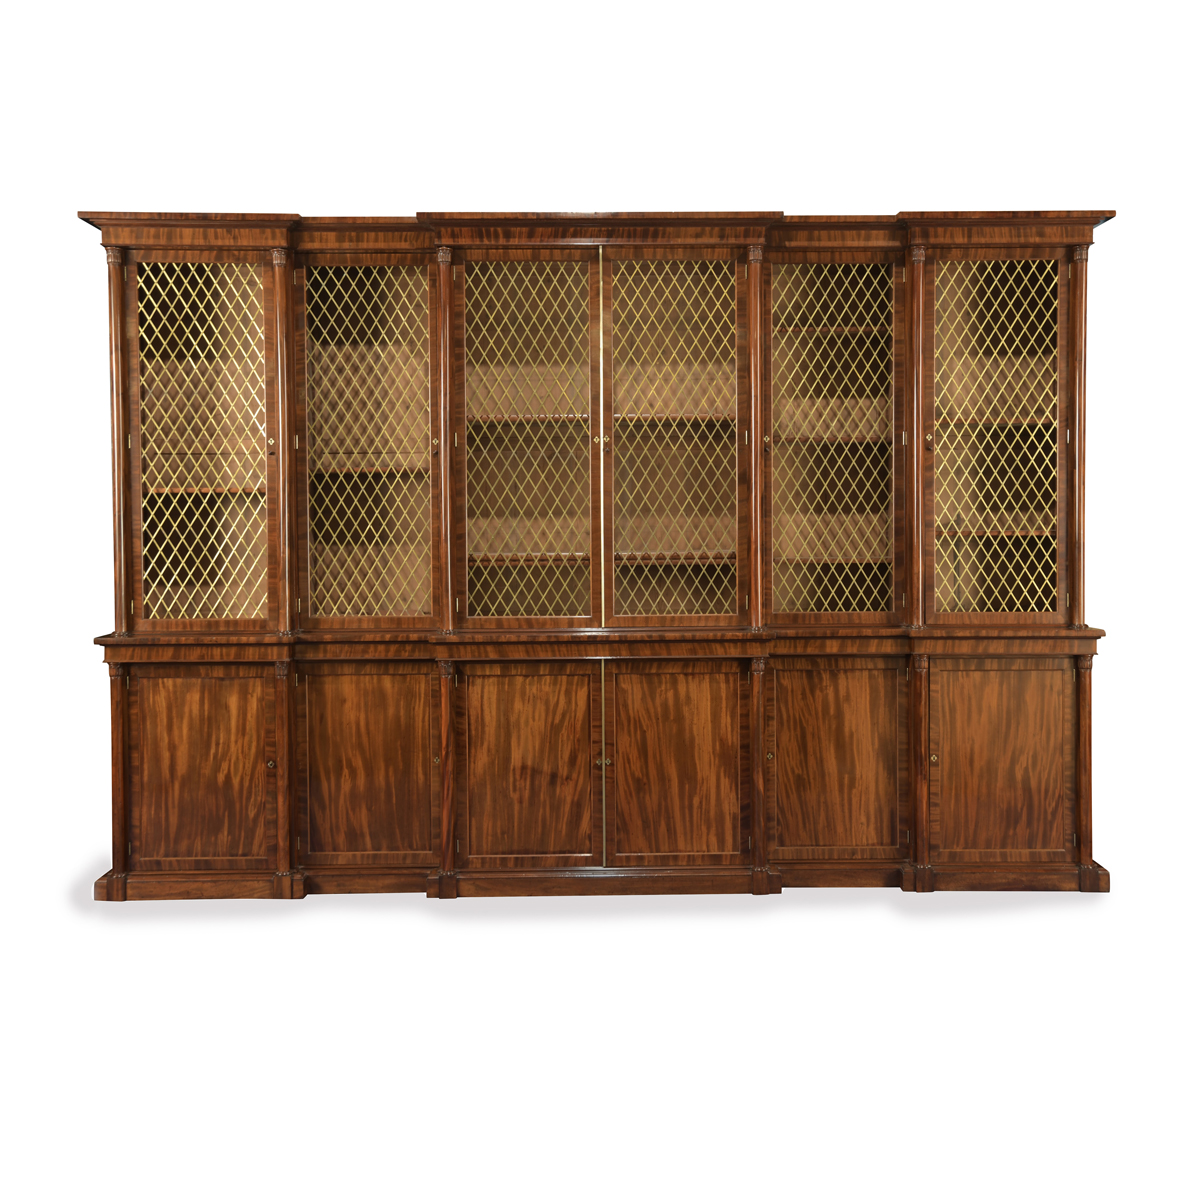 A large and impressive late Regency six door mahogany bookcase attributed to Gillows